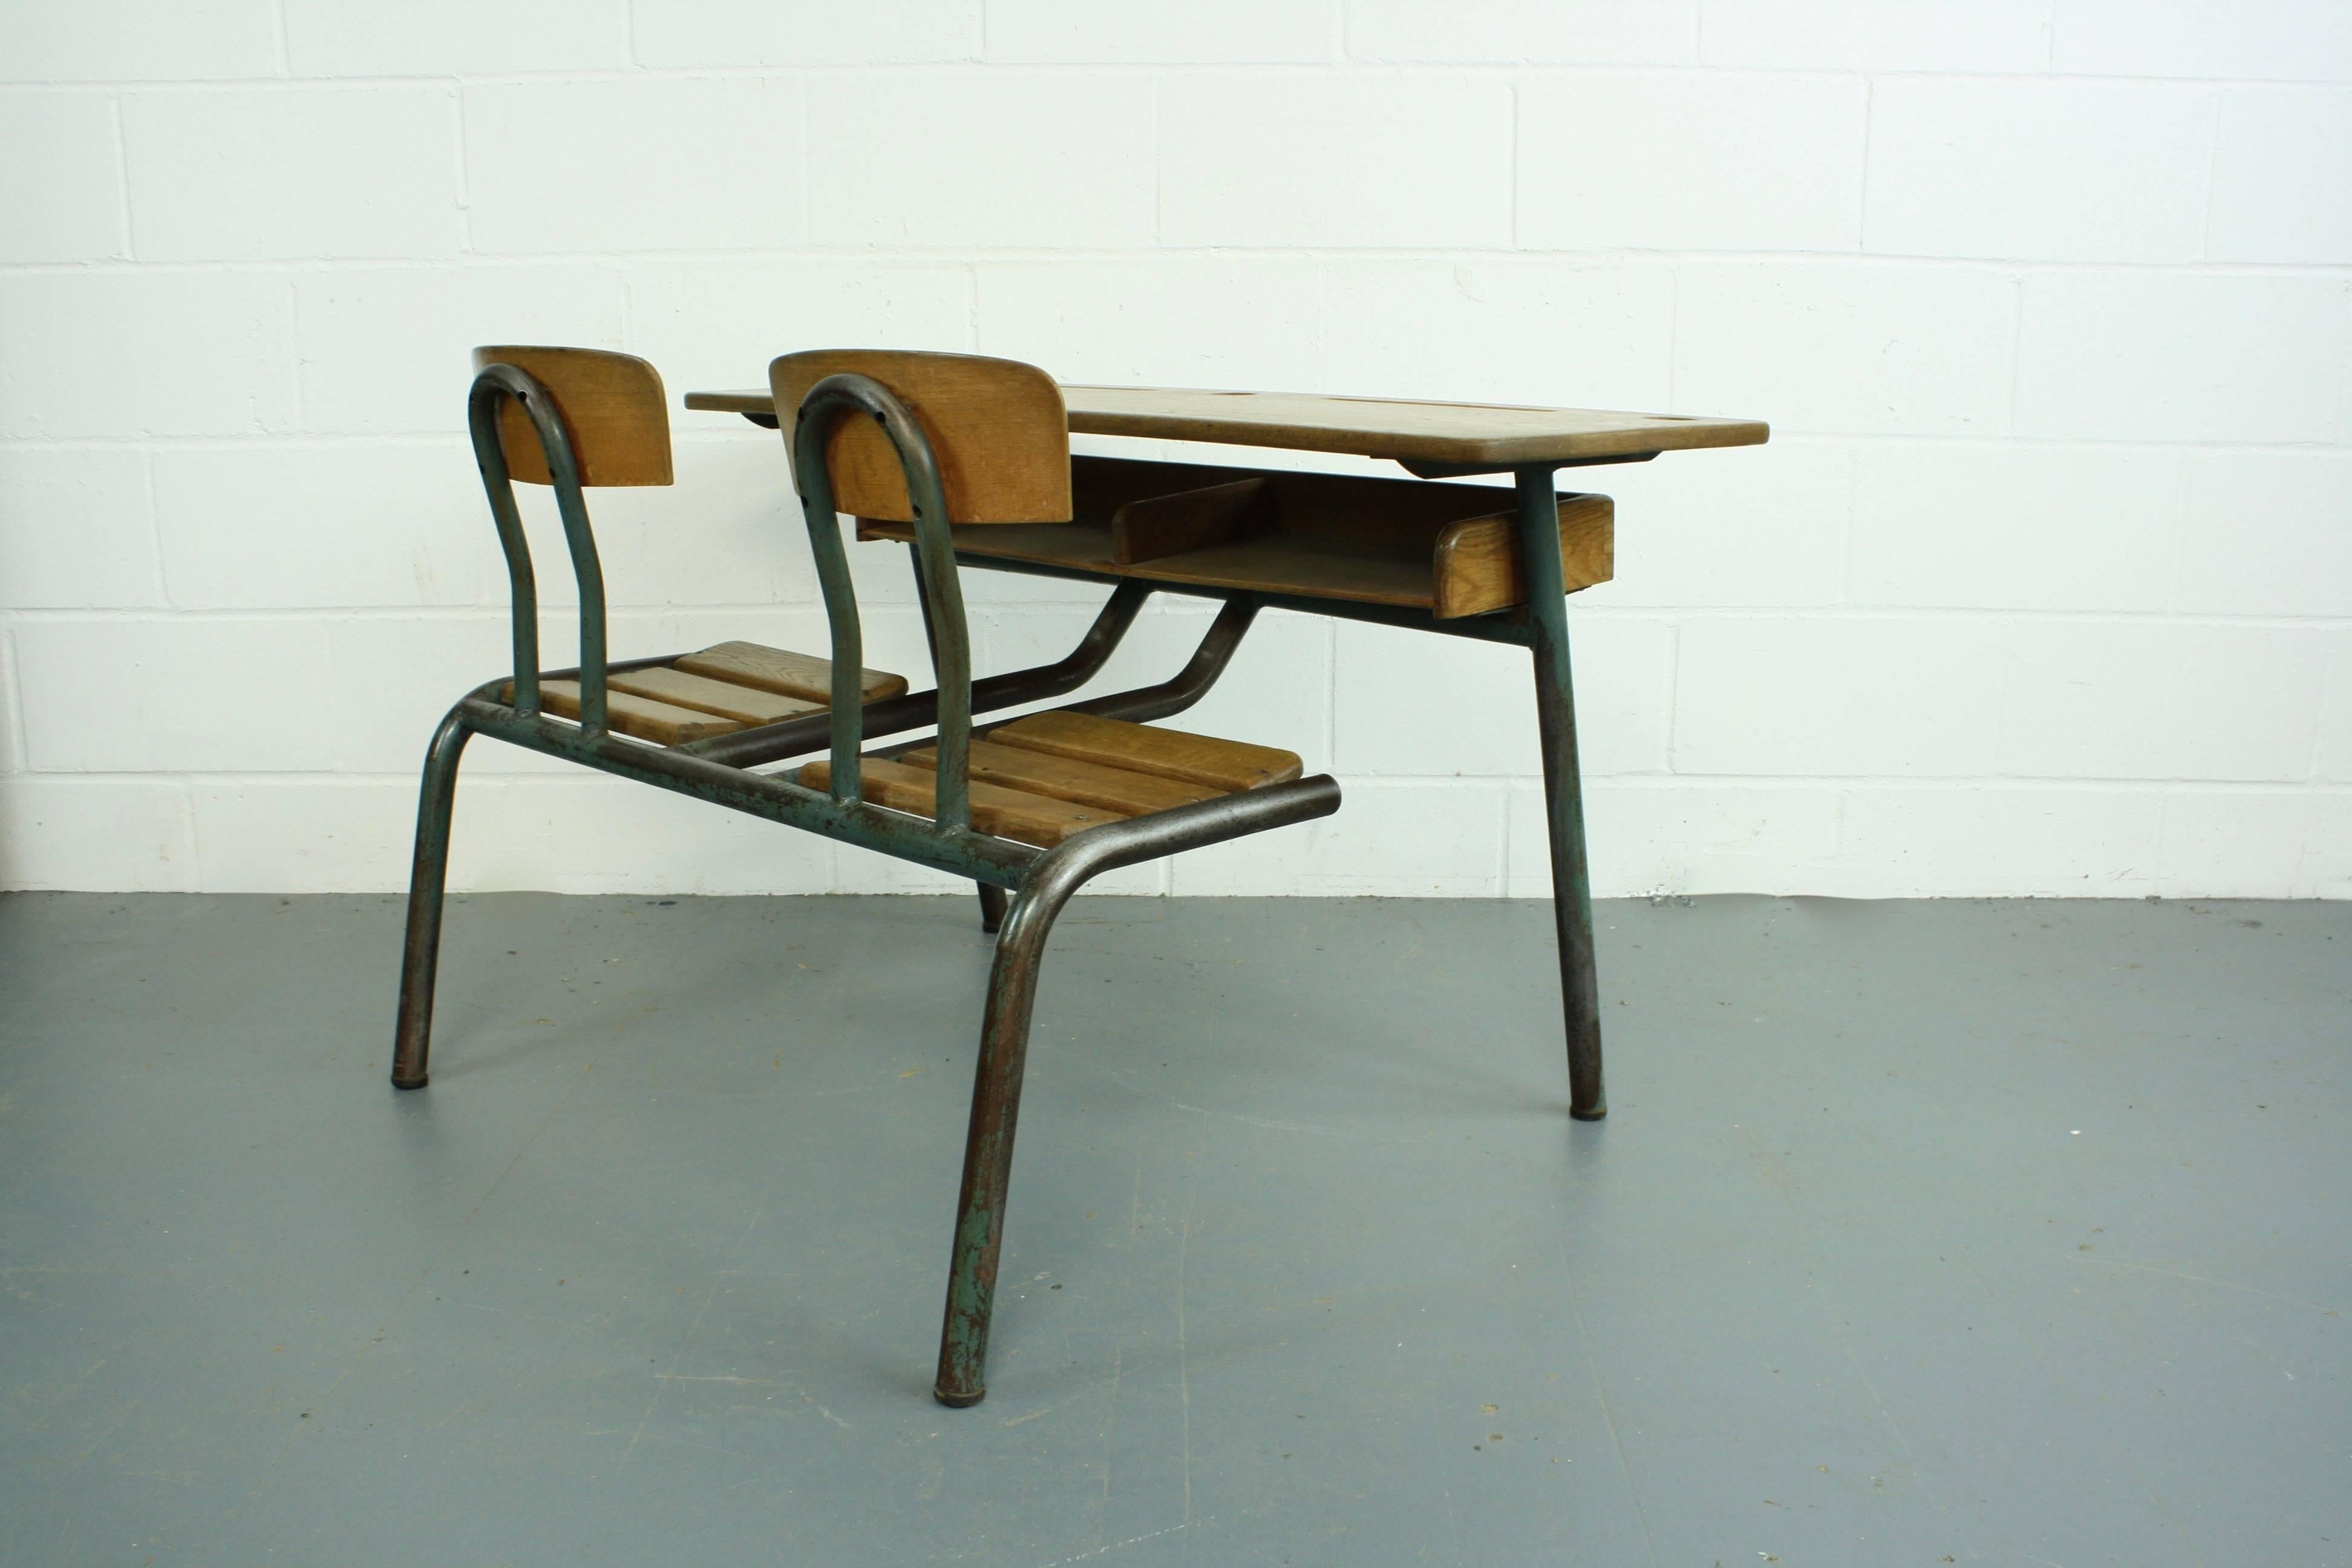 Metal Vintage Early to Mid-20th Century French Child's Double Desk and Chair Set For Sale